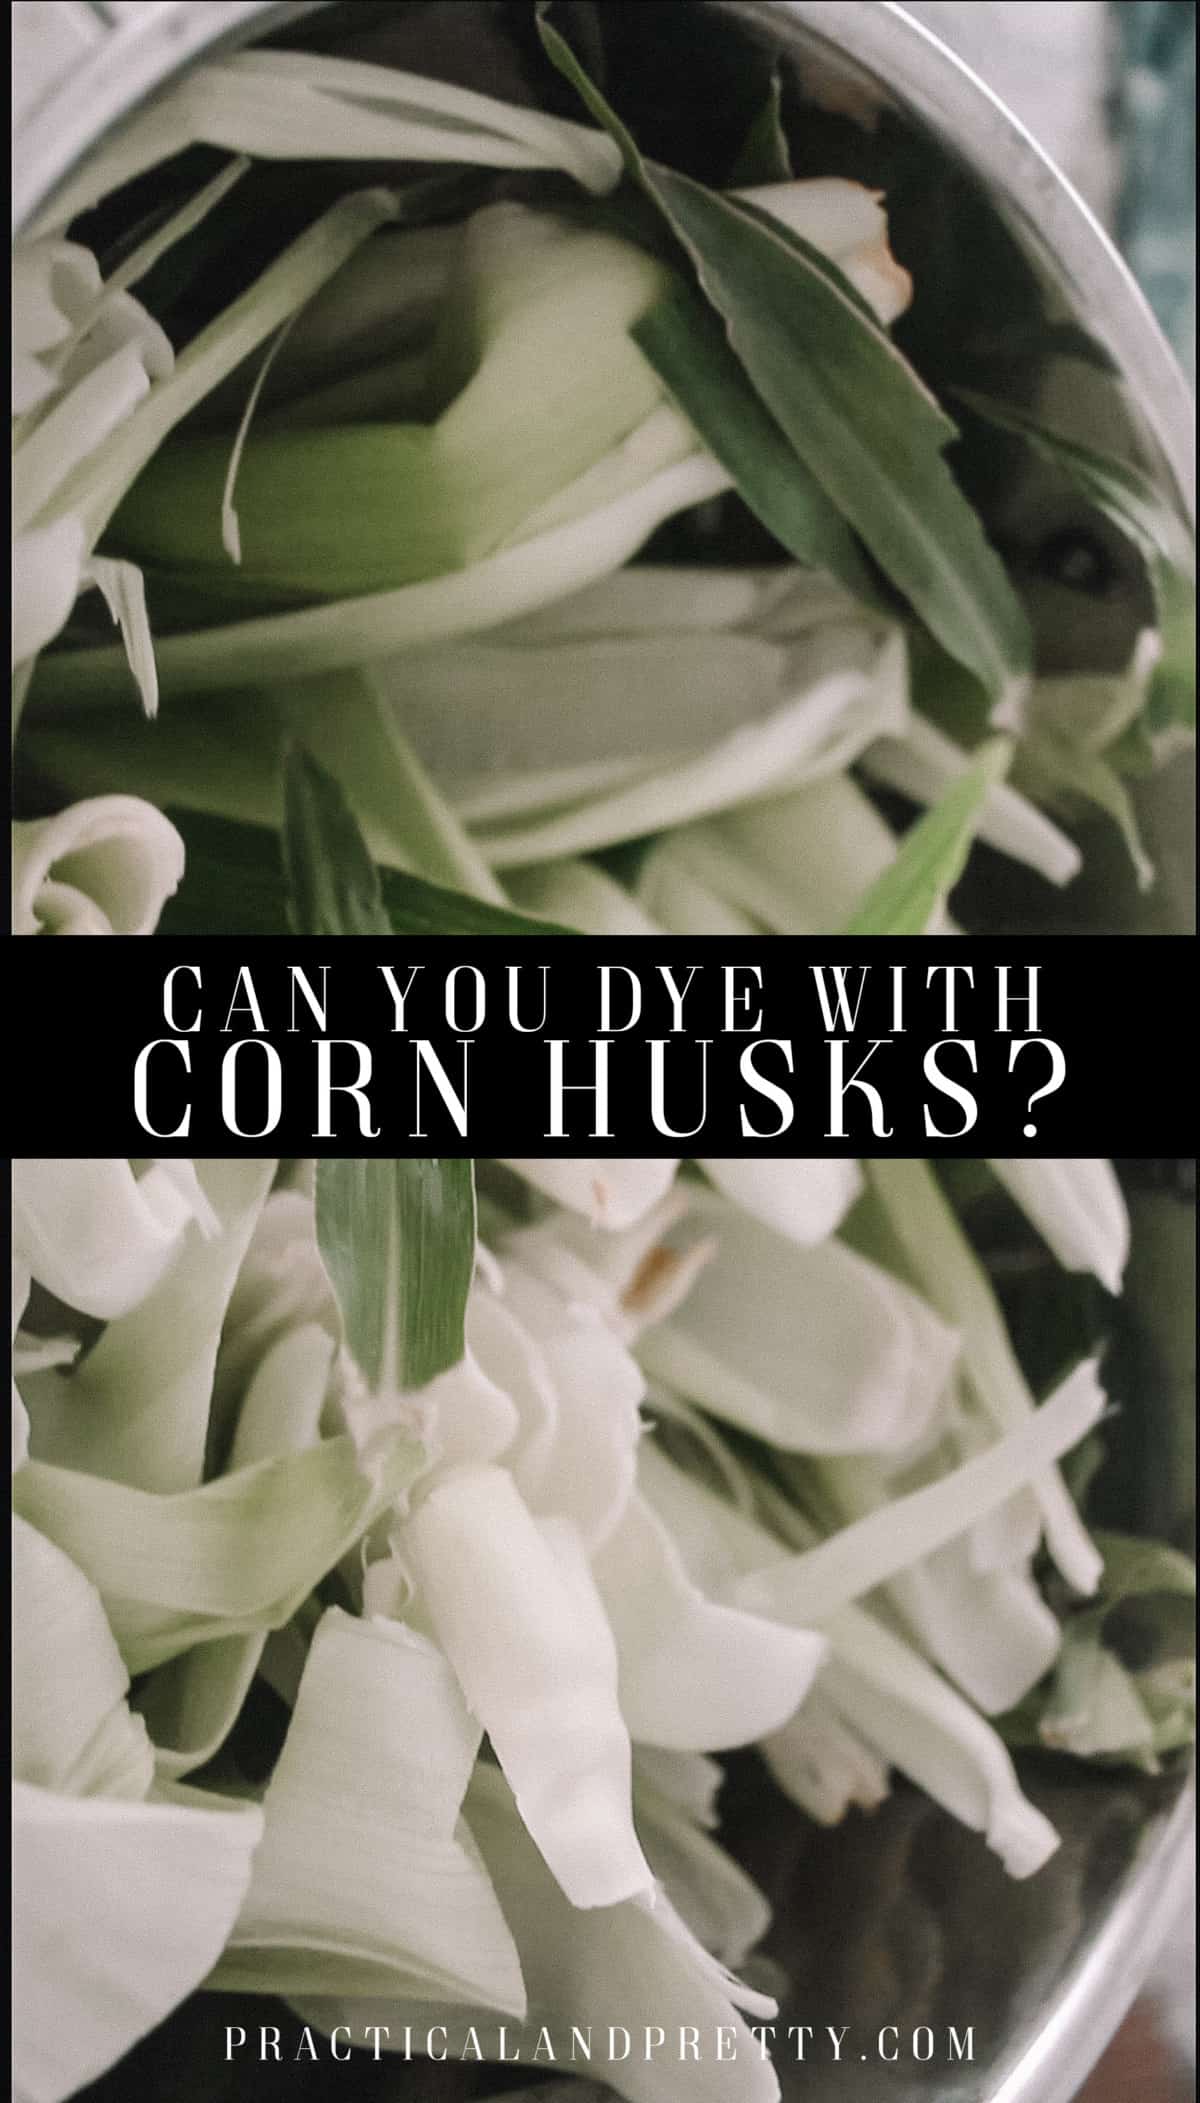 I had to know, can you dye with corn husks? They have so much waste to them I wanted to see if I could get a color out of them.